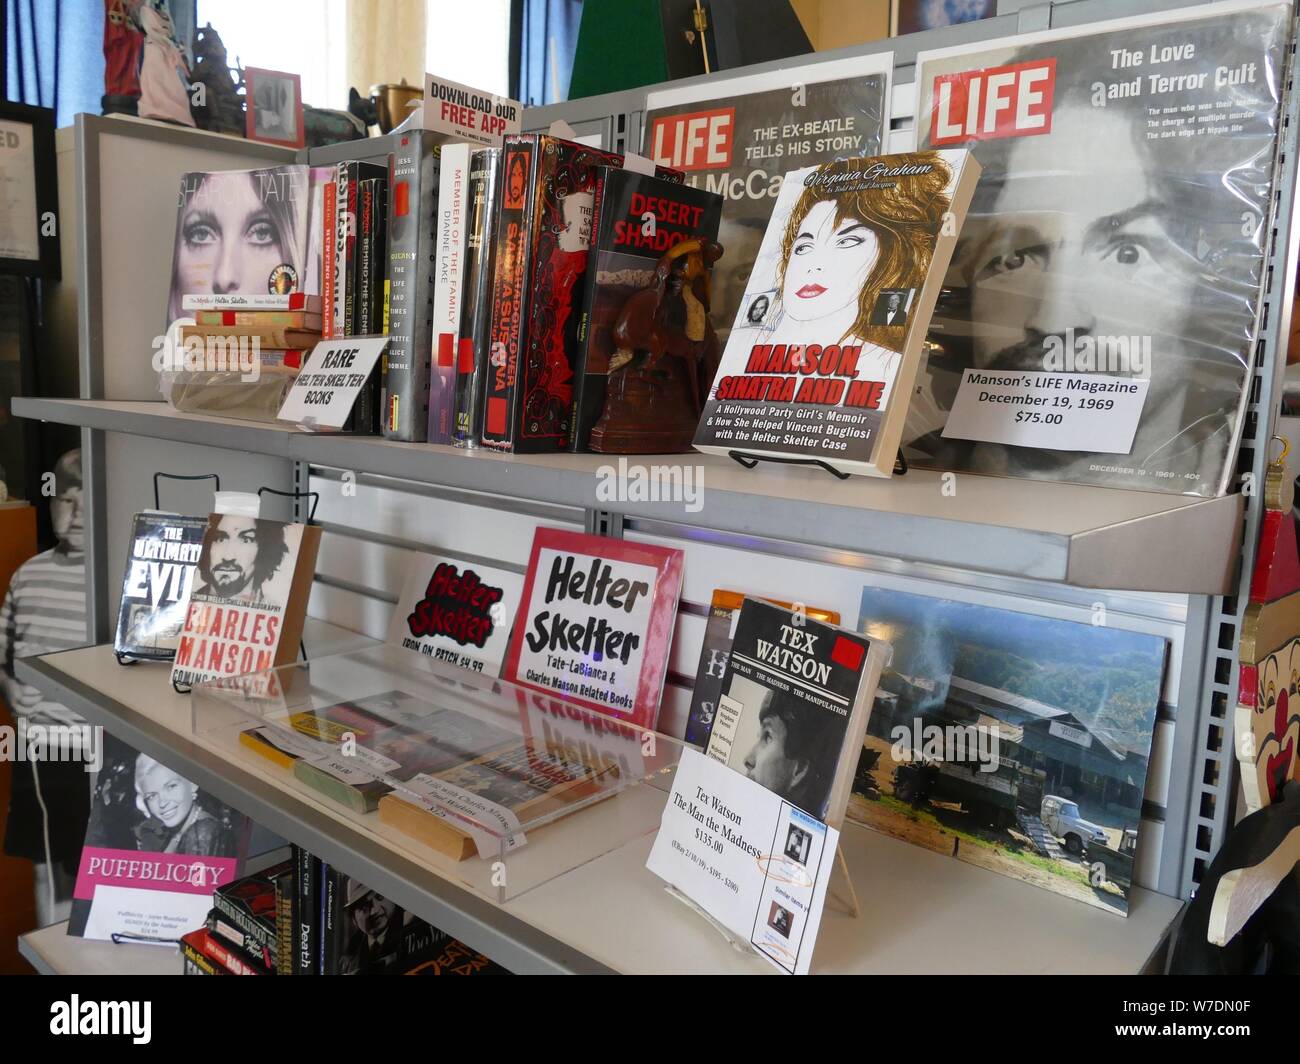 Los Angeles, USA. 03rd Aug, 2019. Exhibits, including books and posters on Charles Manson's series of murders and his followers, are on display in the small museum of 'Dearly Departed Tours'. A barbaric series of murders scared the world 50 years ago. Sect leader Charles Manson incited his followers to blood orgies. In 1969 also the highly pregnant actress Sharon Tate was killed. (to dpa '50 Years after the Manson Bloodbath: On the Trails of Sharon Tate') Credit: Barbara Munker/dpa/Alamy Live News Stock Photo